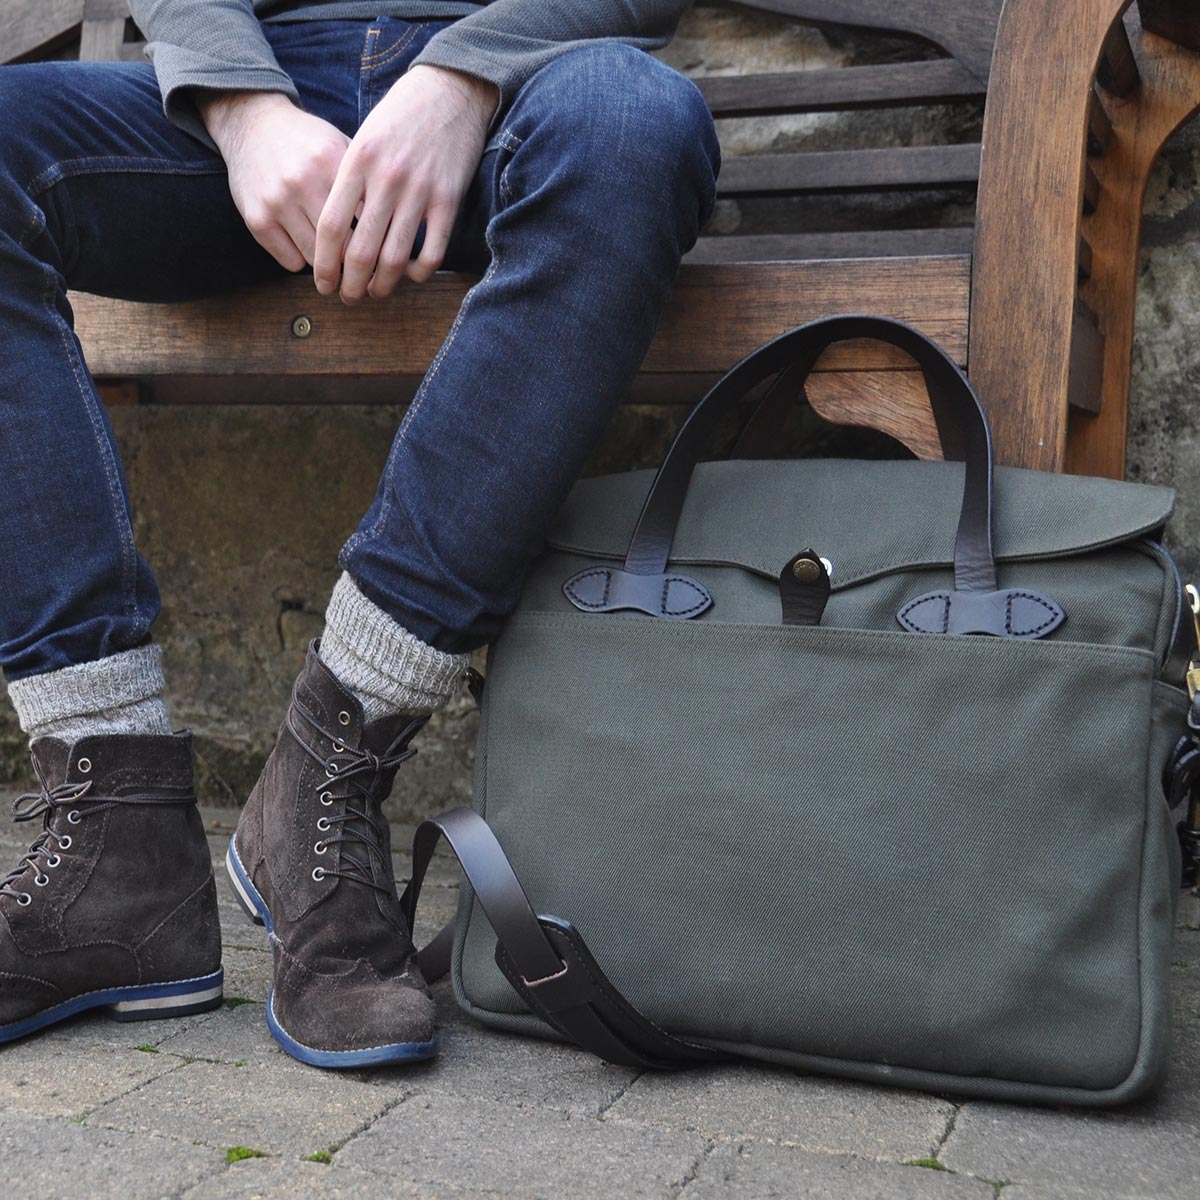 Filson Original Briefcase Otter Green, perfect bag with style and character